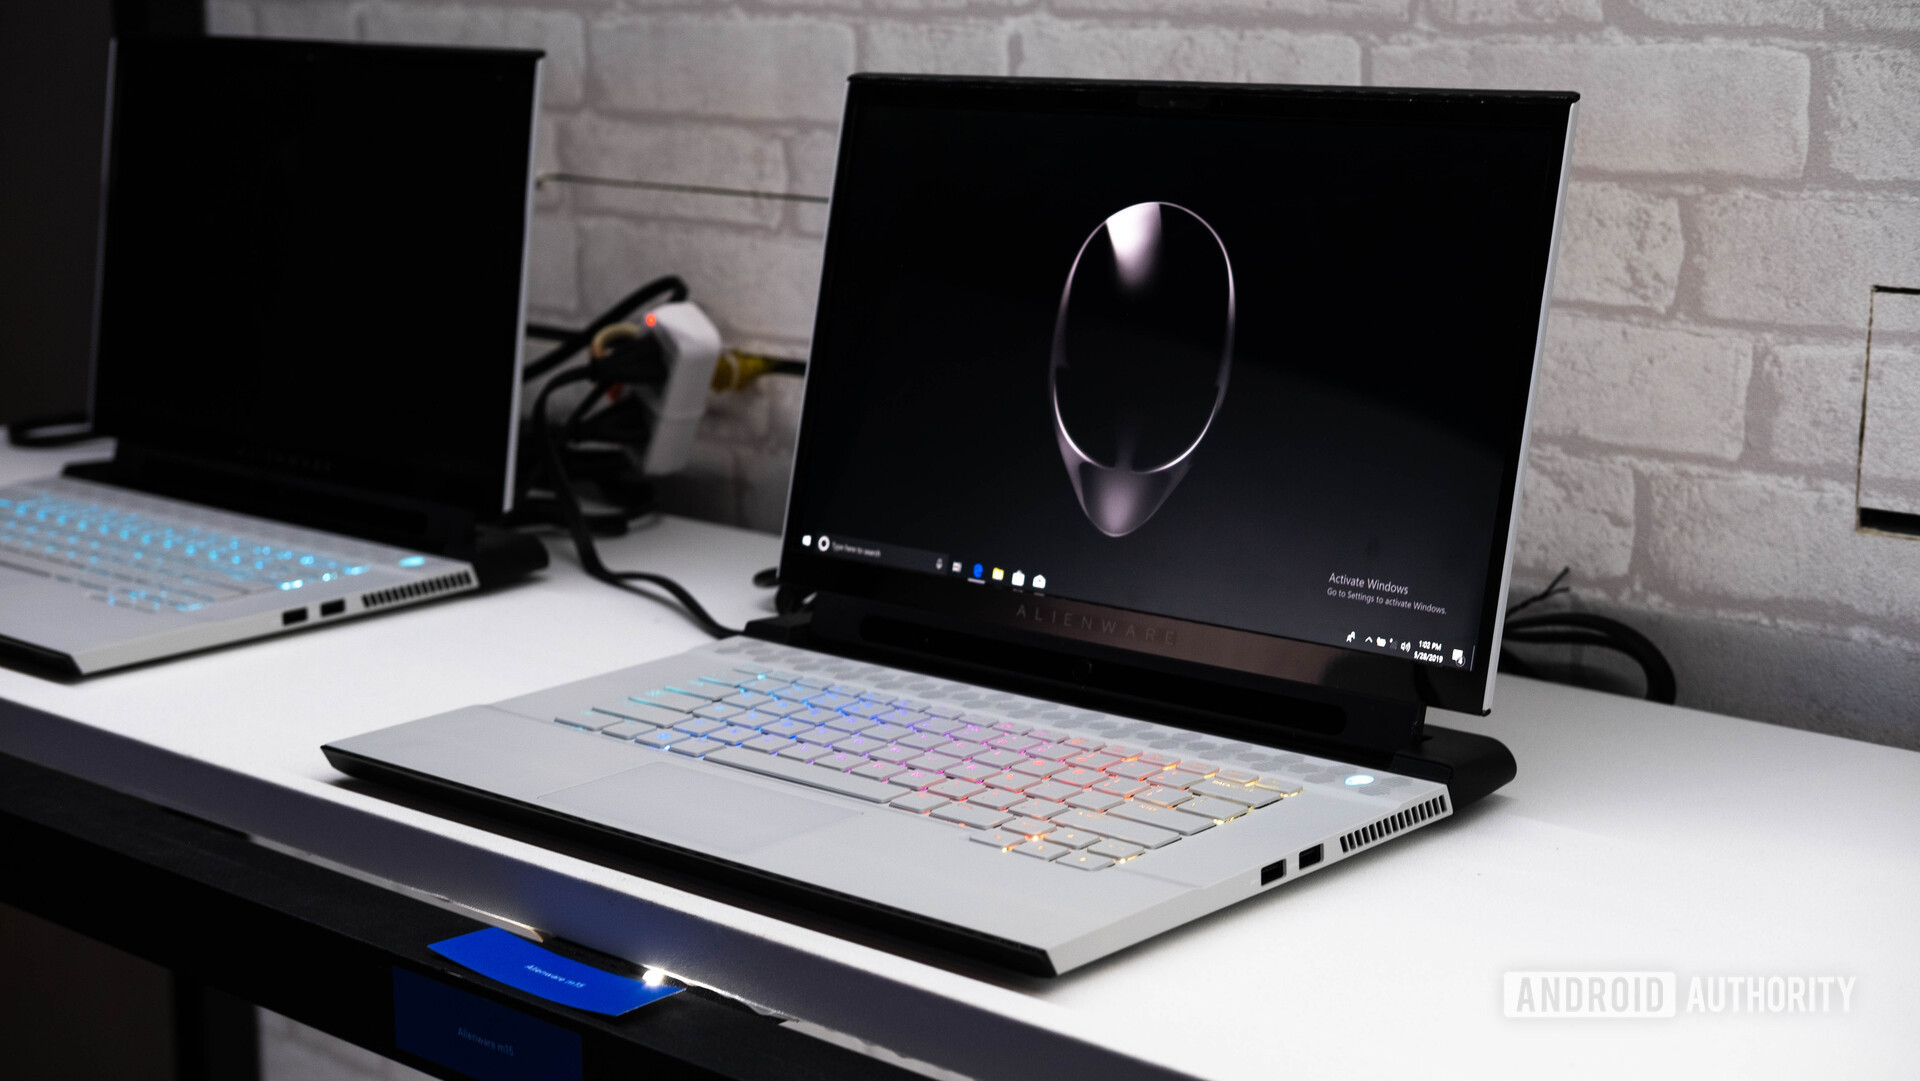 The Best Laptops With Rtx 2080 Graphics To Buy In 2020